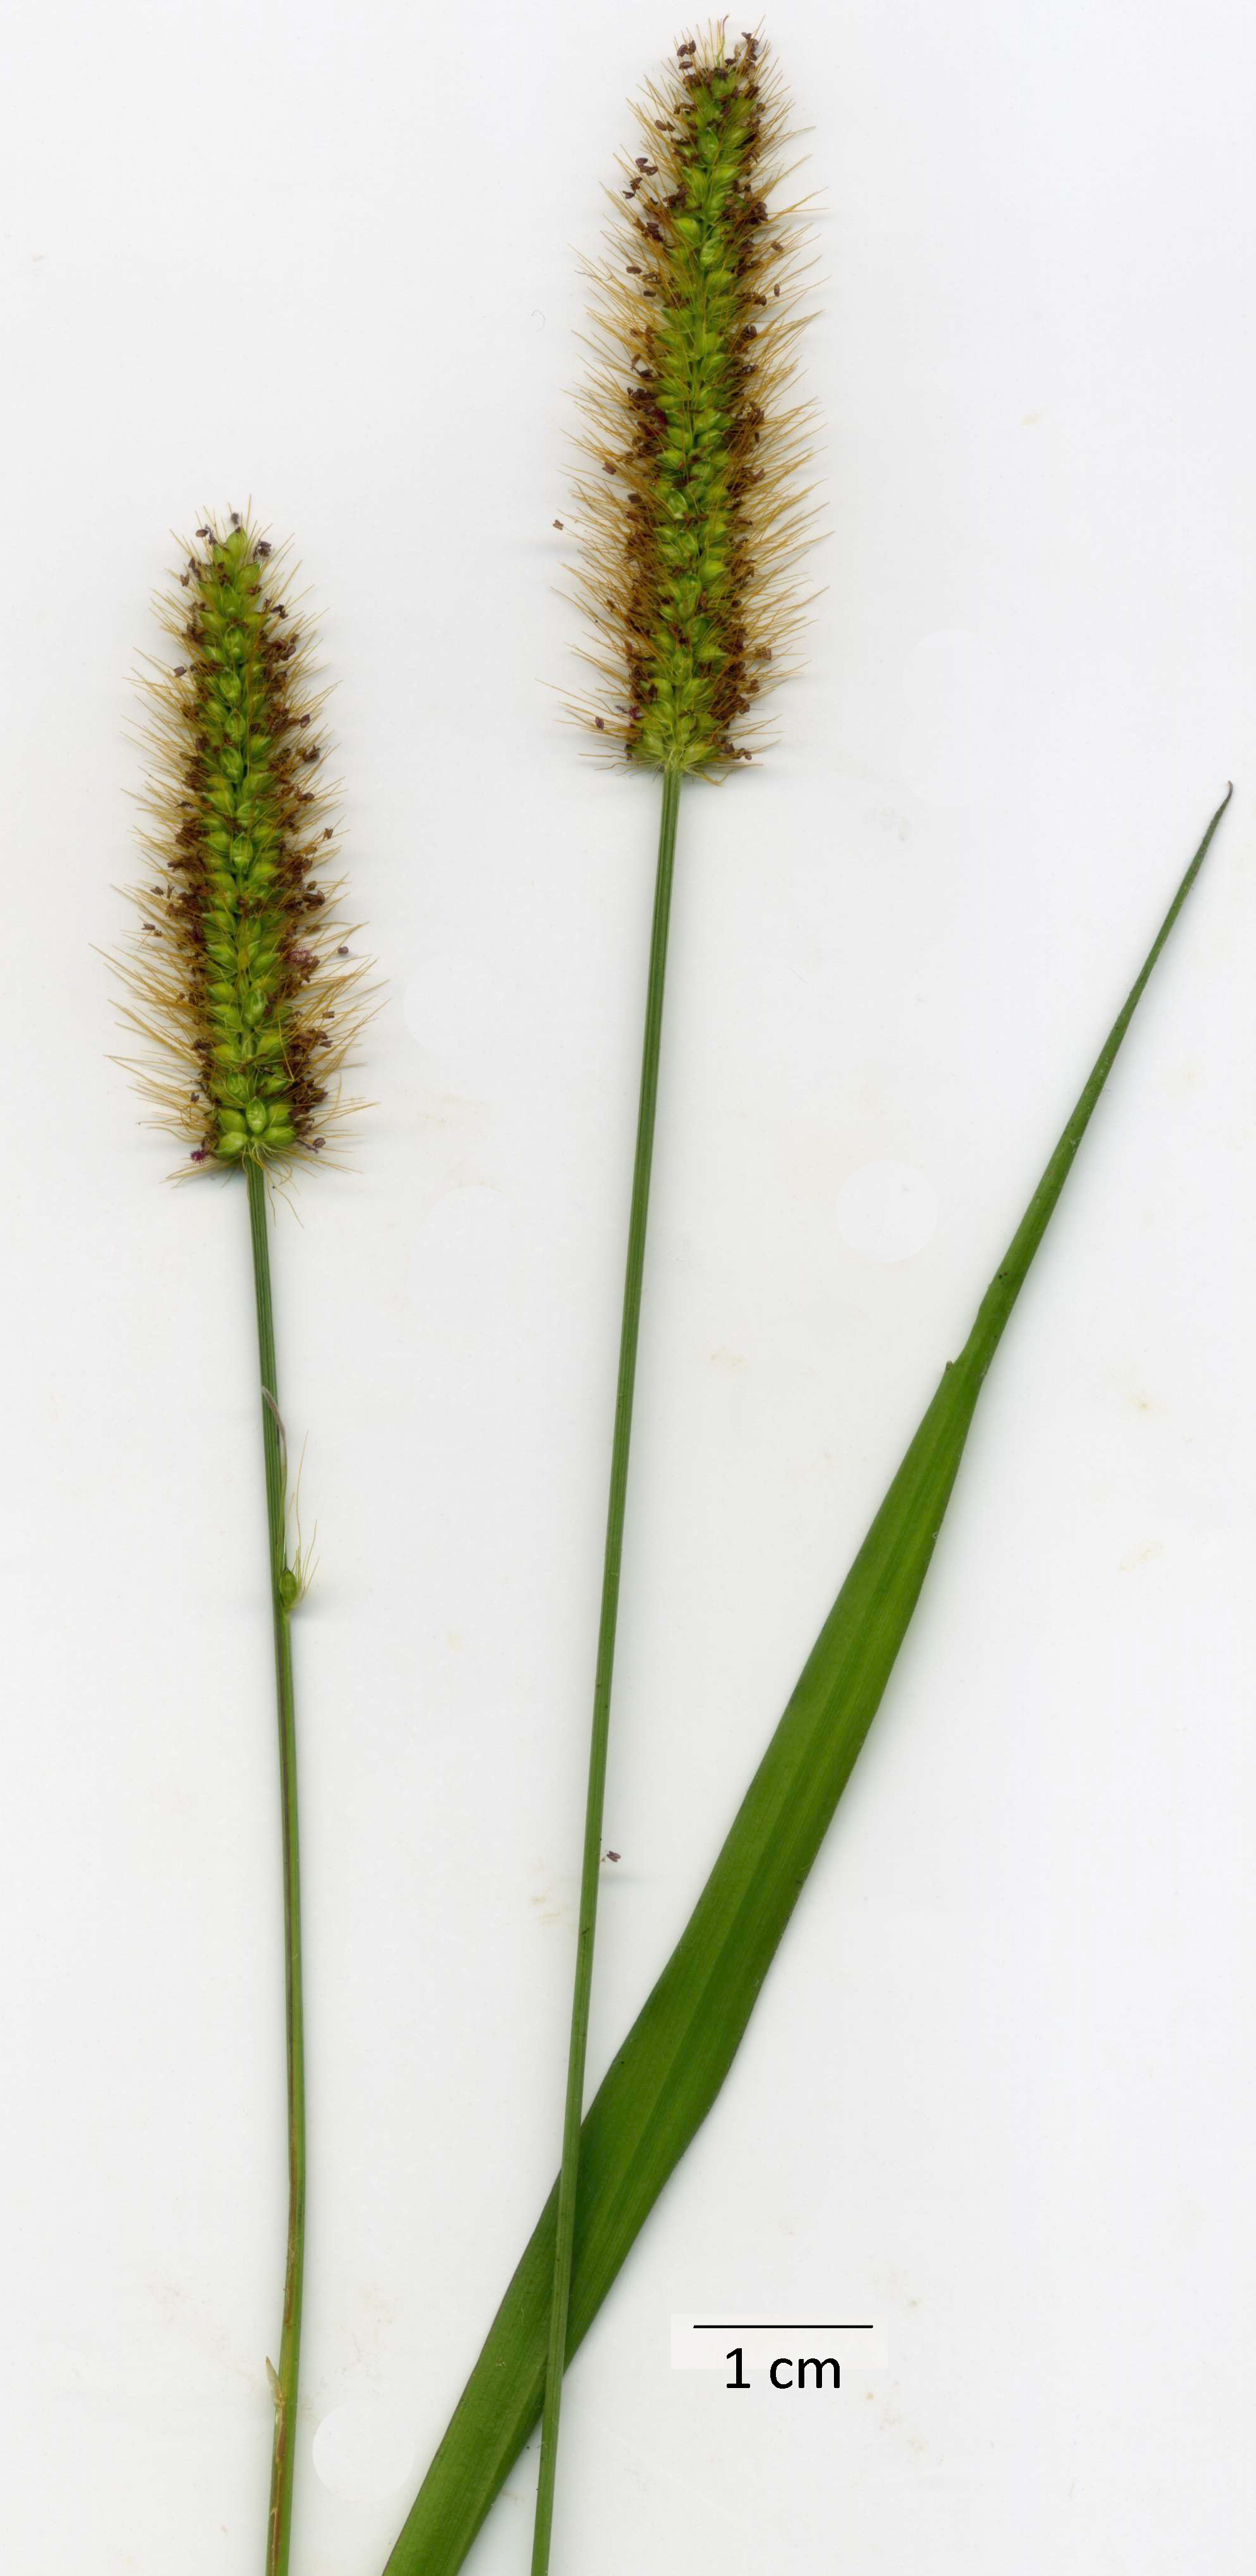 Inflorescence of S. parviflora